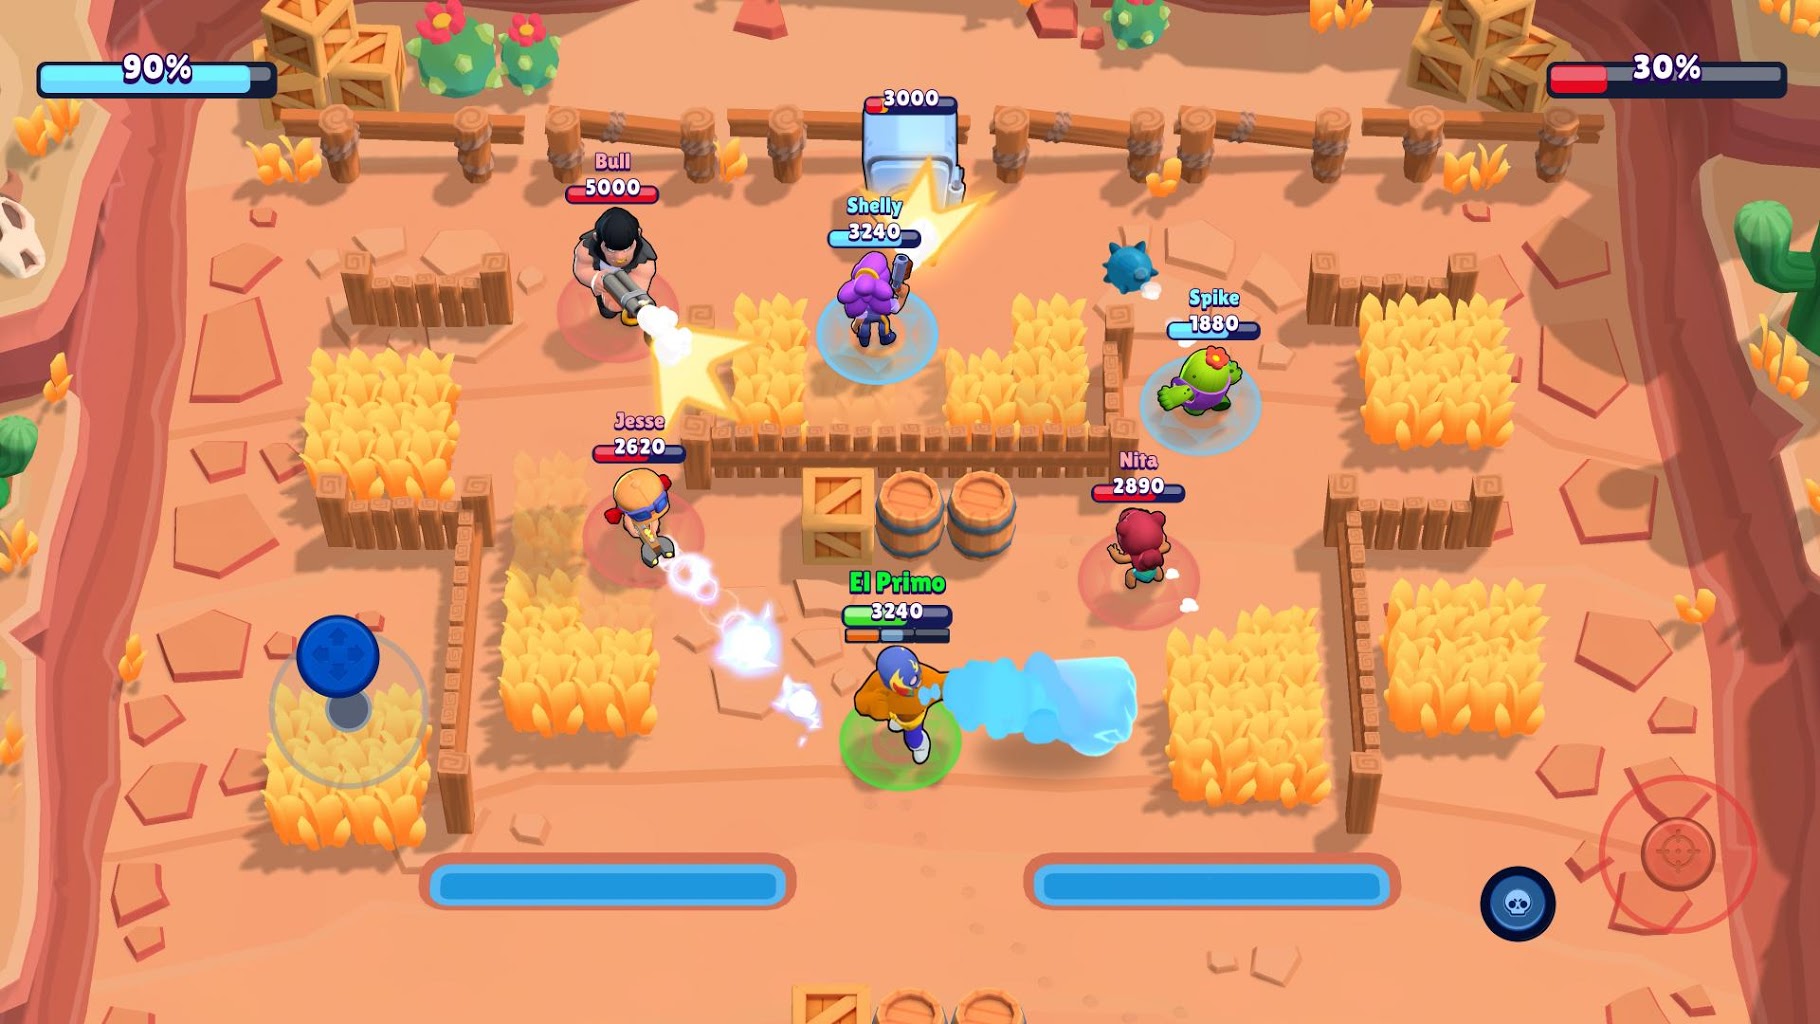 Download Brawl Stars 36 270 Apk Mod Money For Android - download brawl stars apk 2019